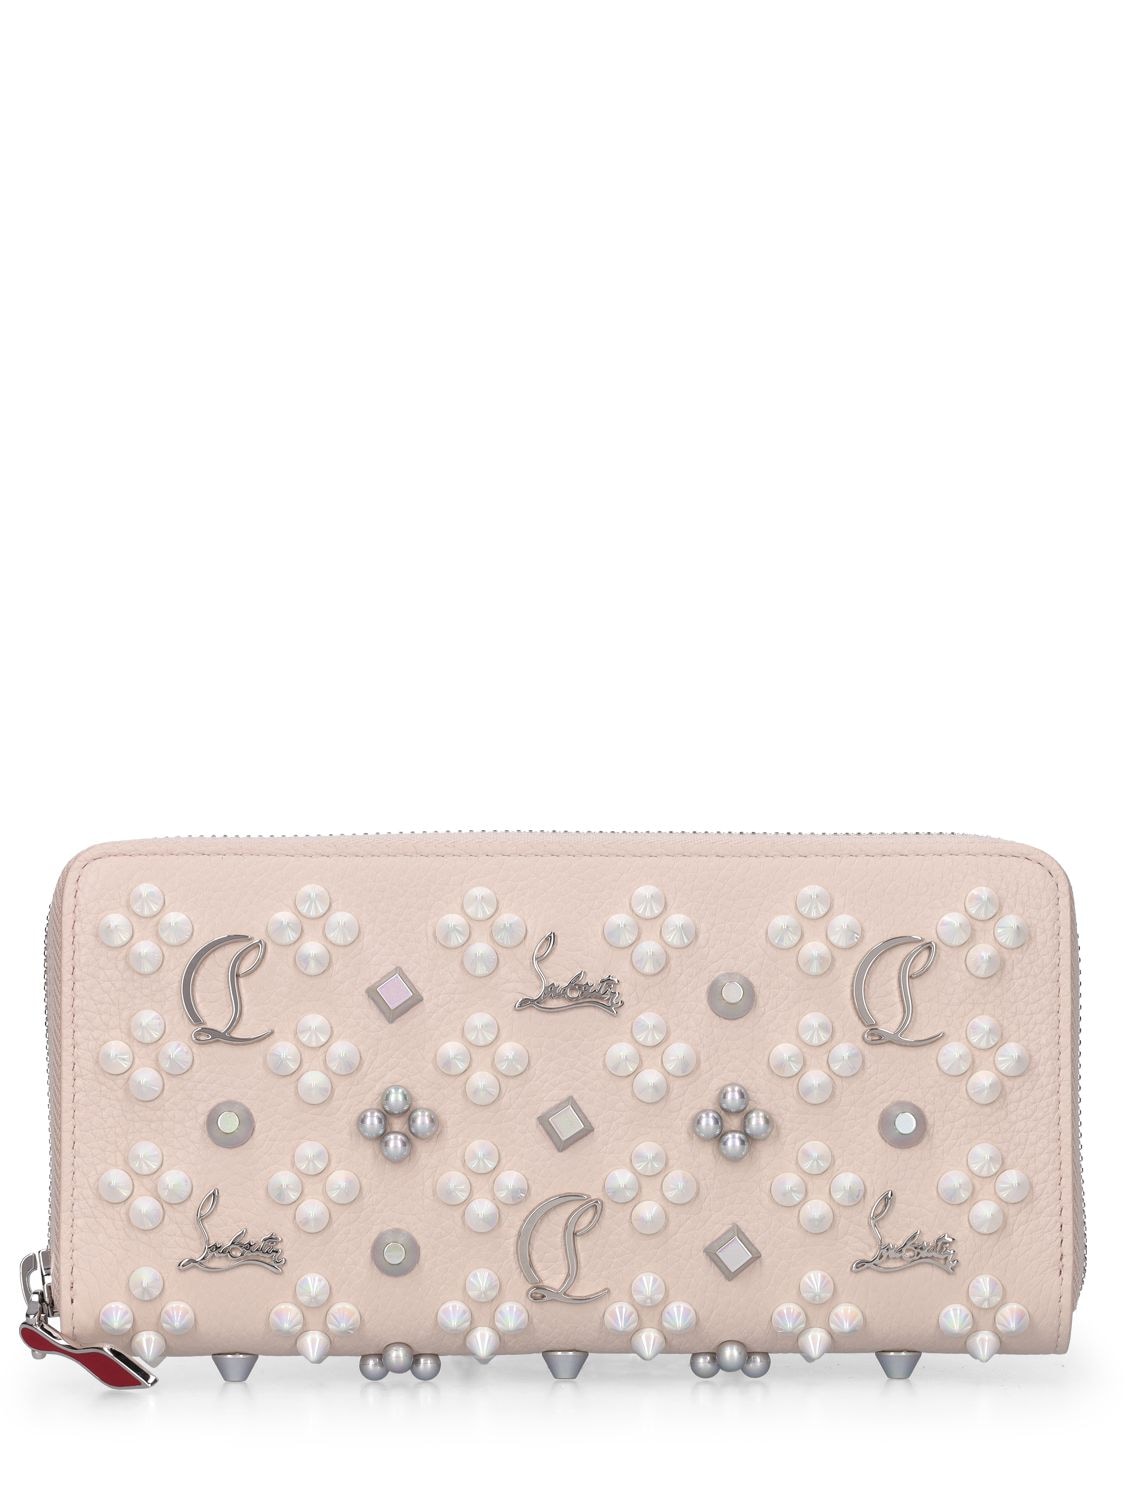 Christian Louboutin Panettone Leather Zip Wallet In Leche